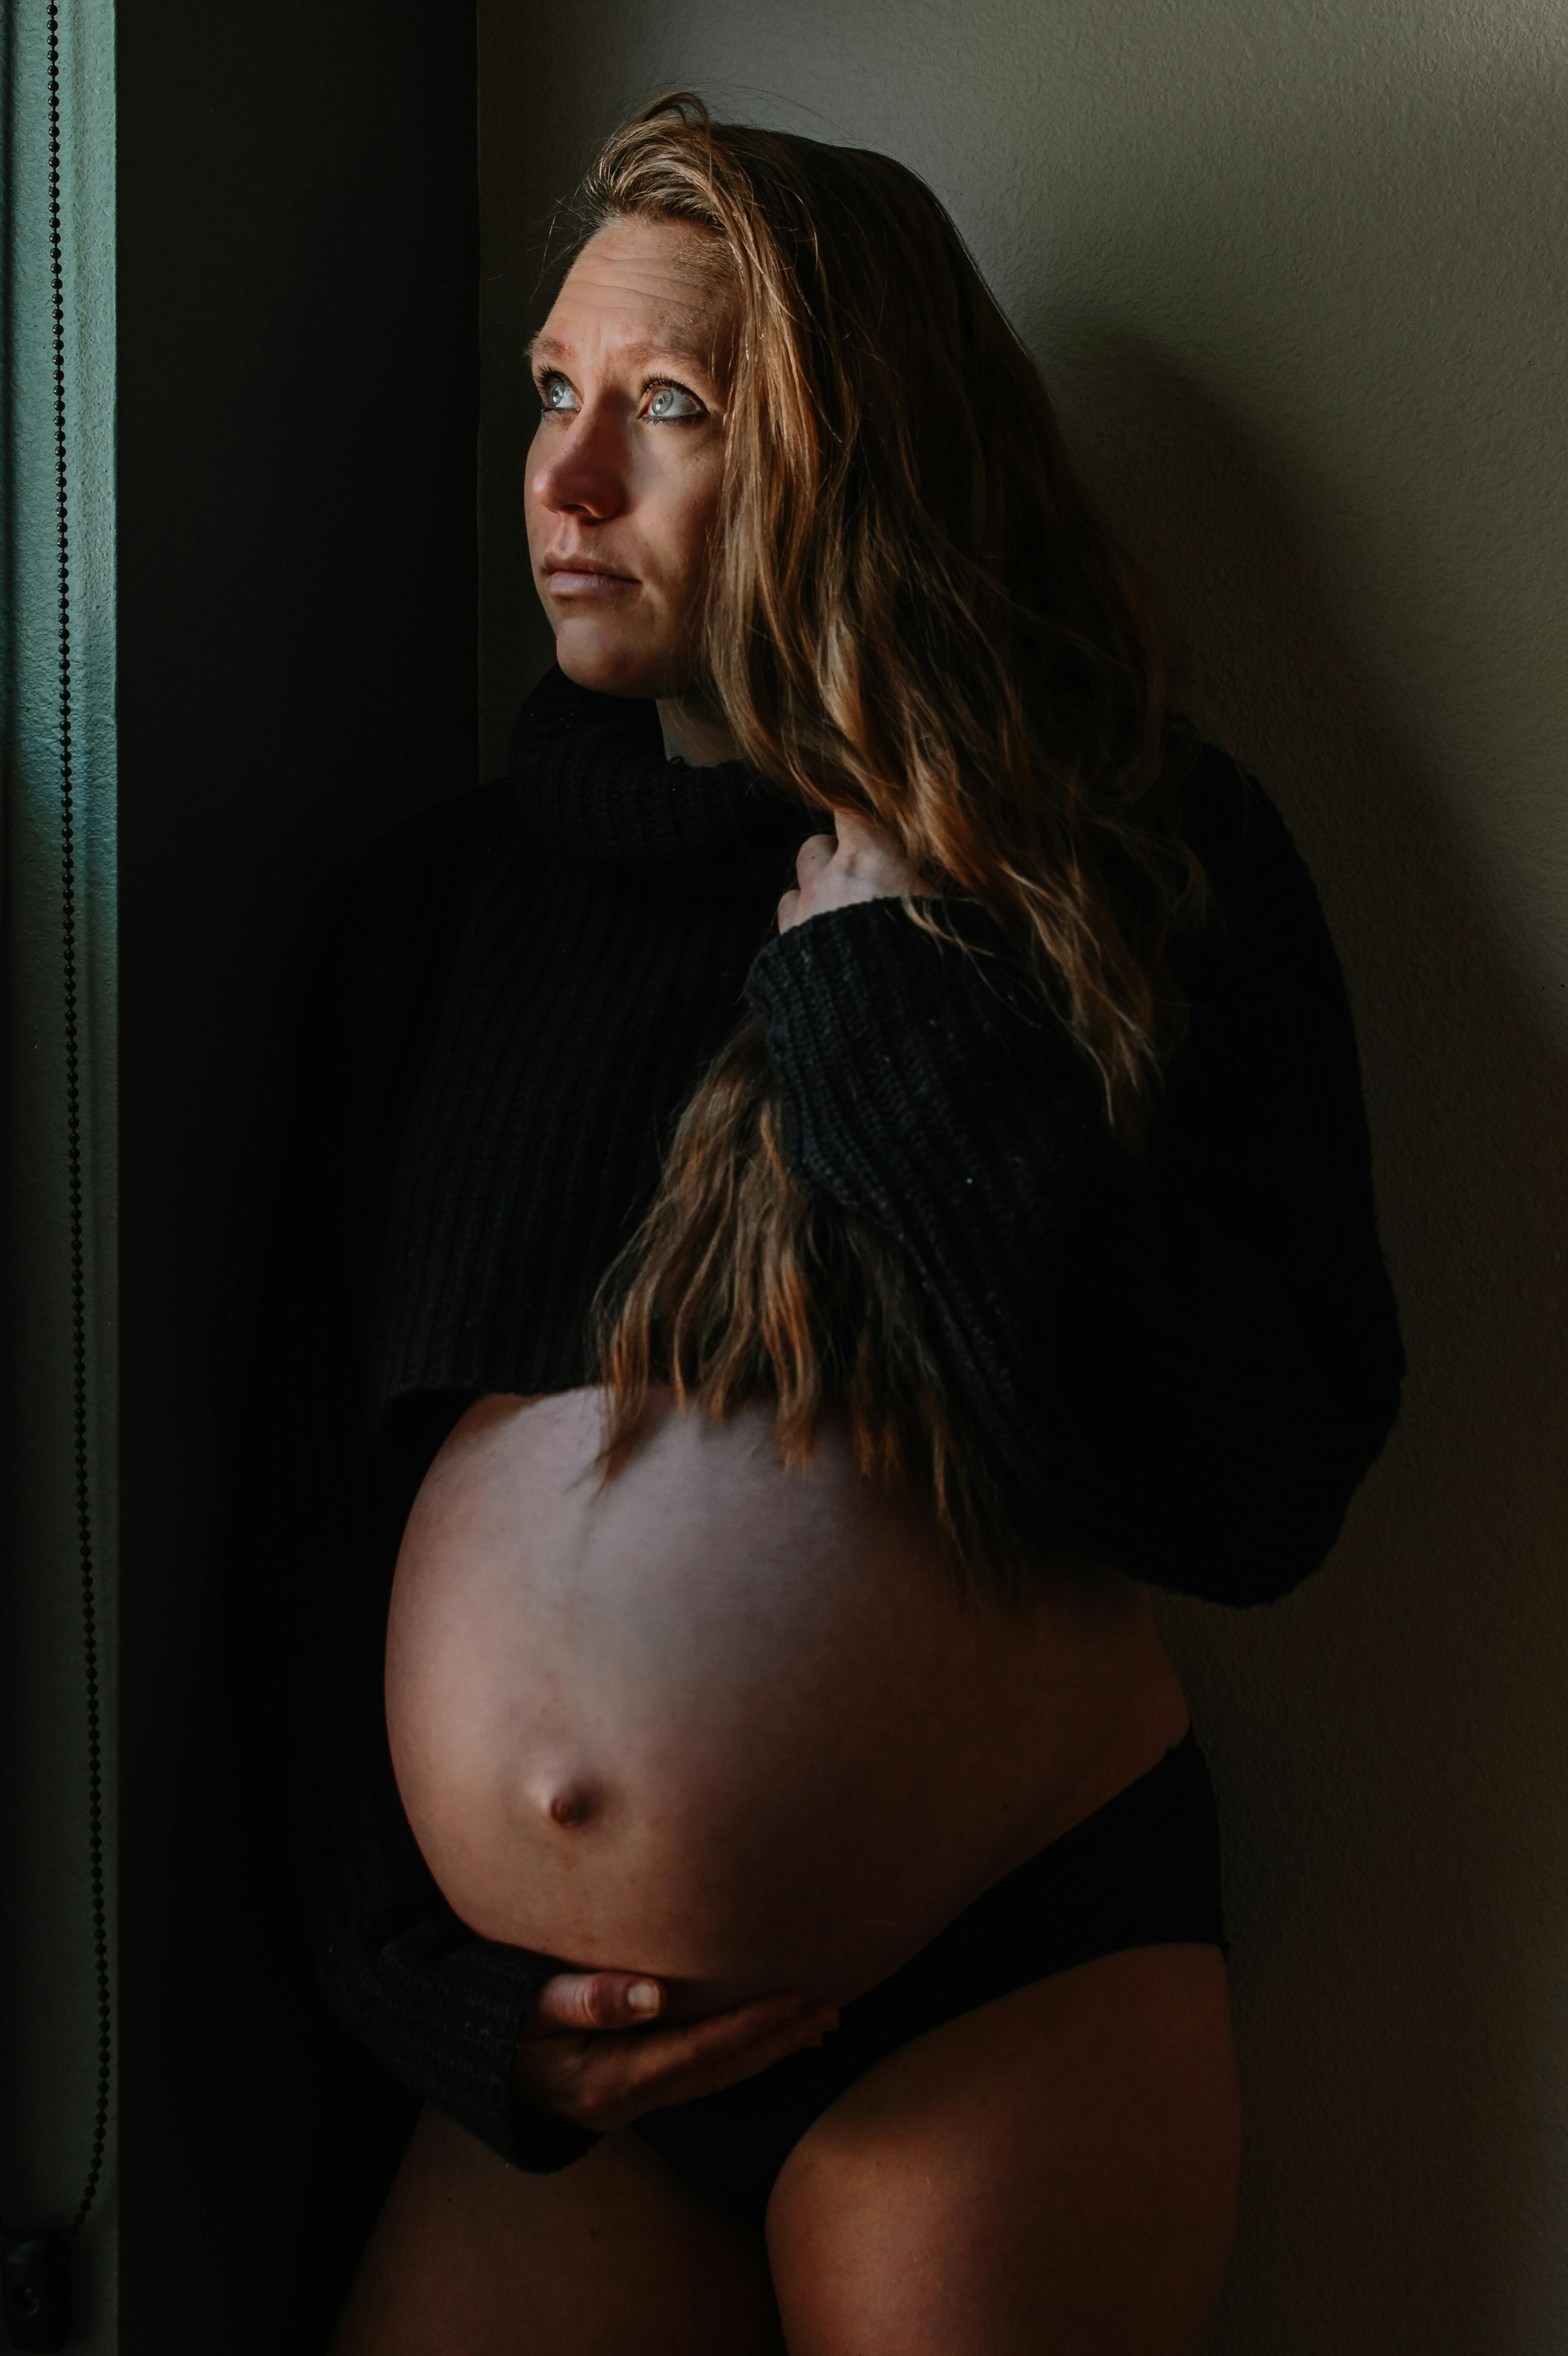 A Pregnant Woman Holding Her Belly · Free Stock Photo photo